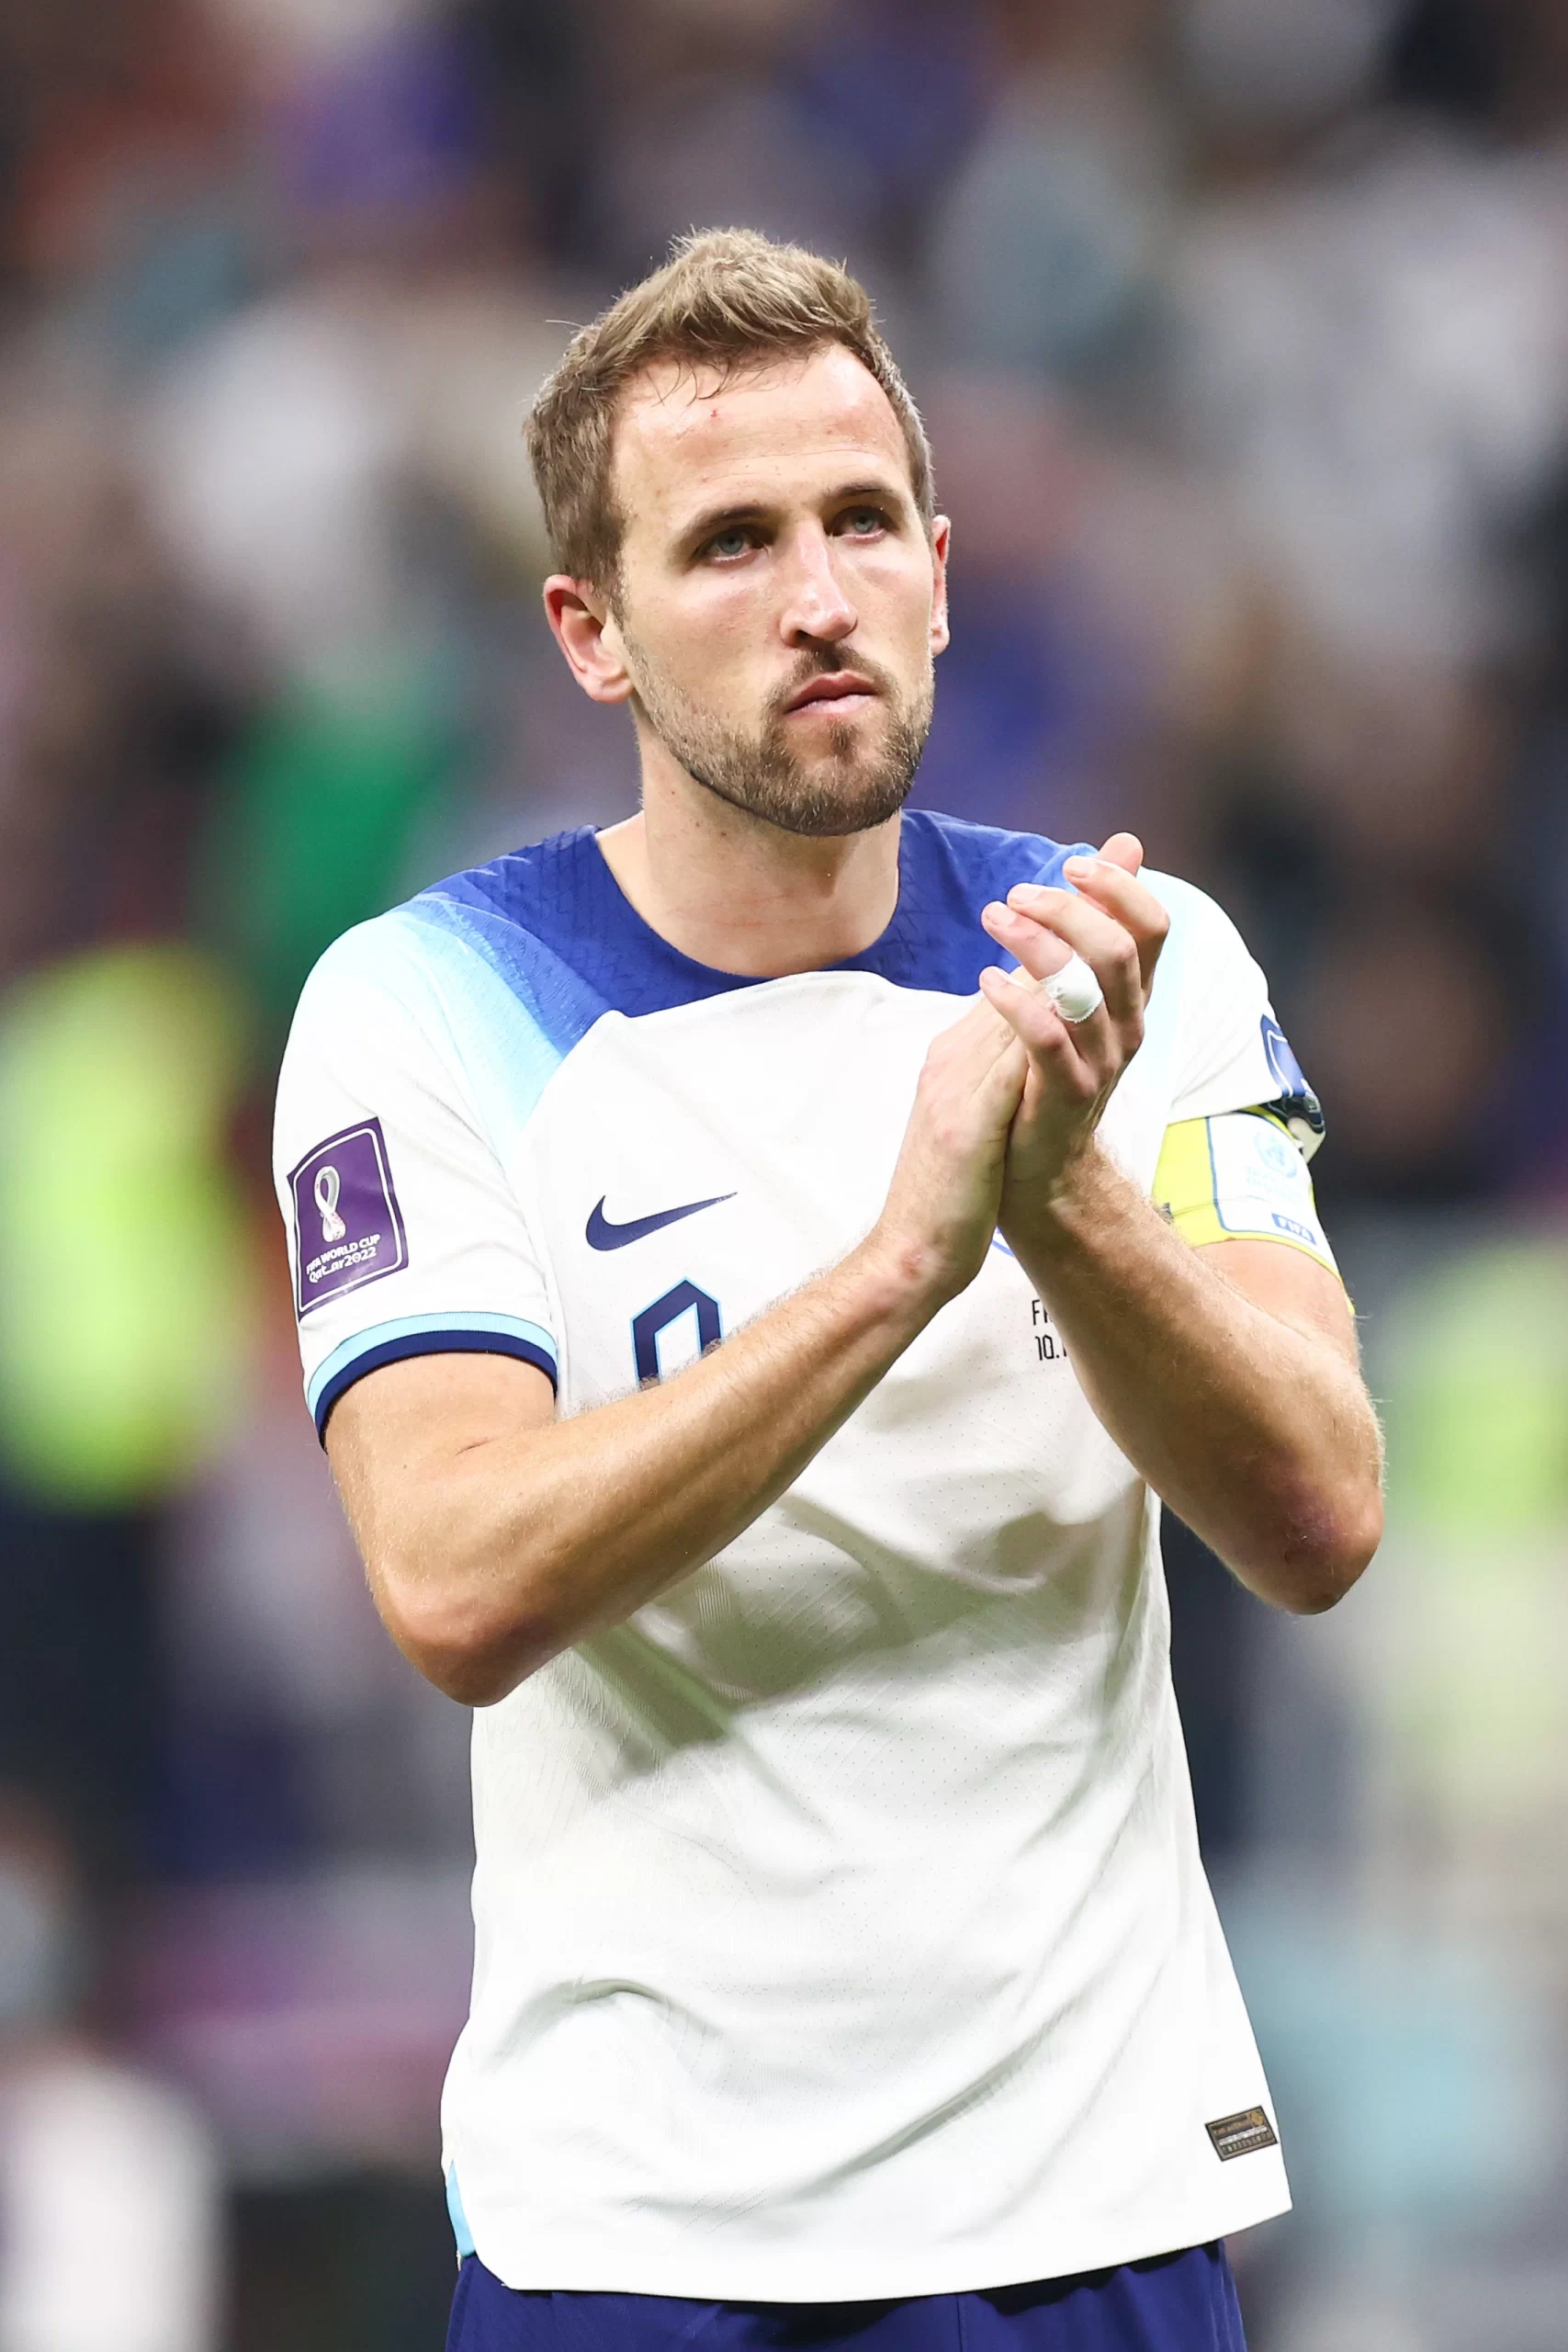 2022 World Cup: Blame Me For England Ouster –Kane